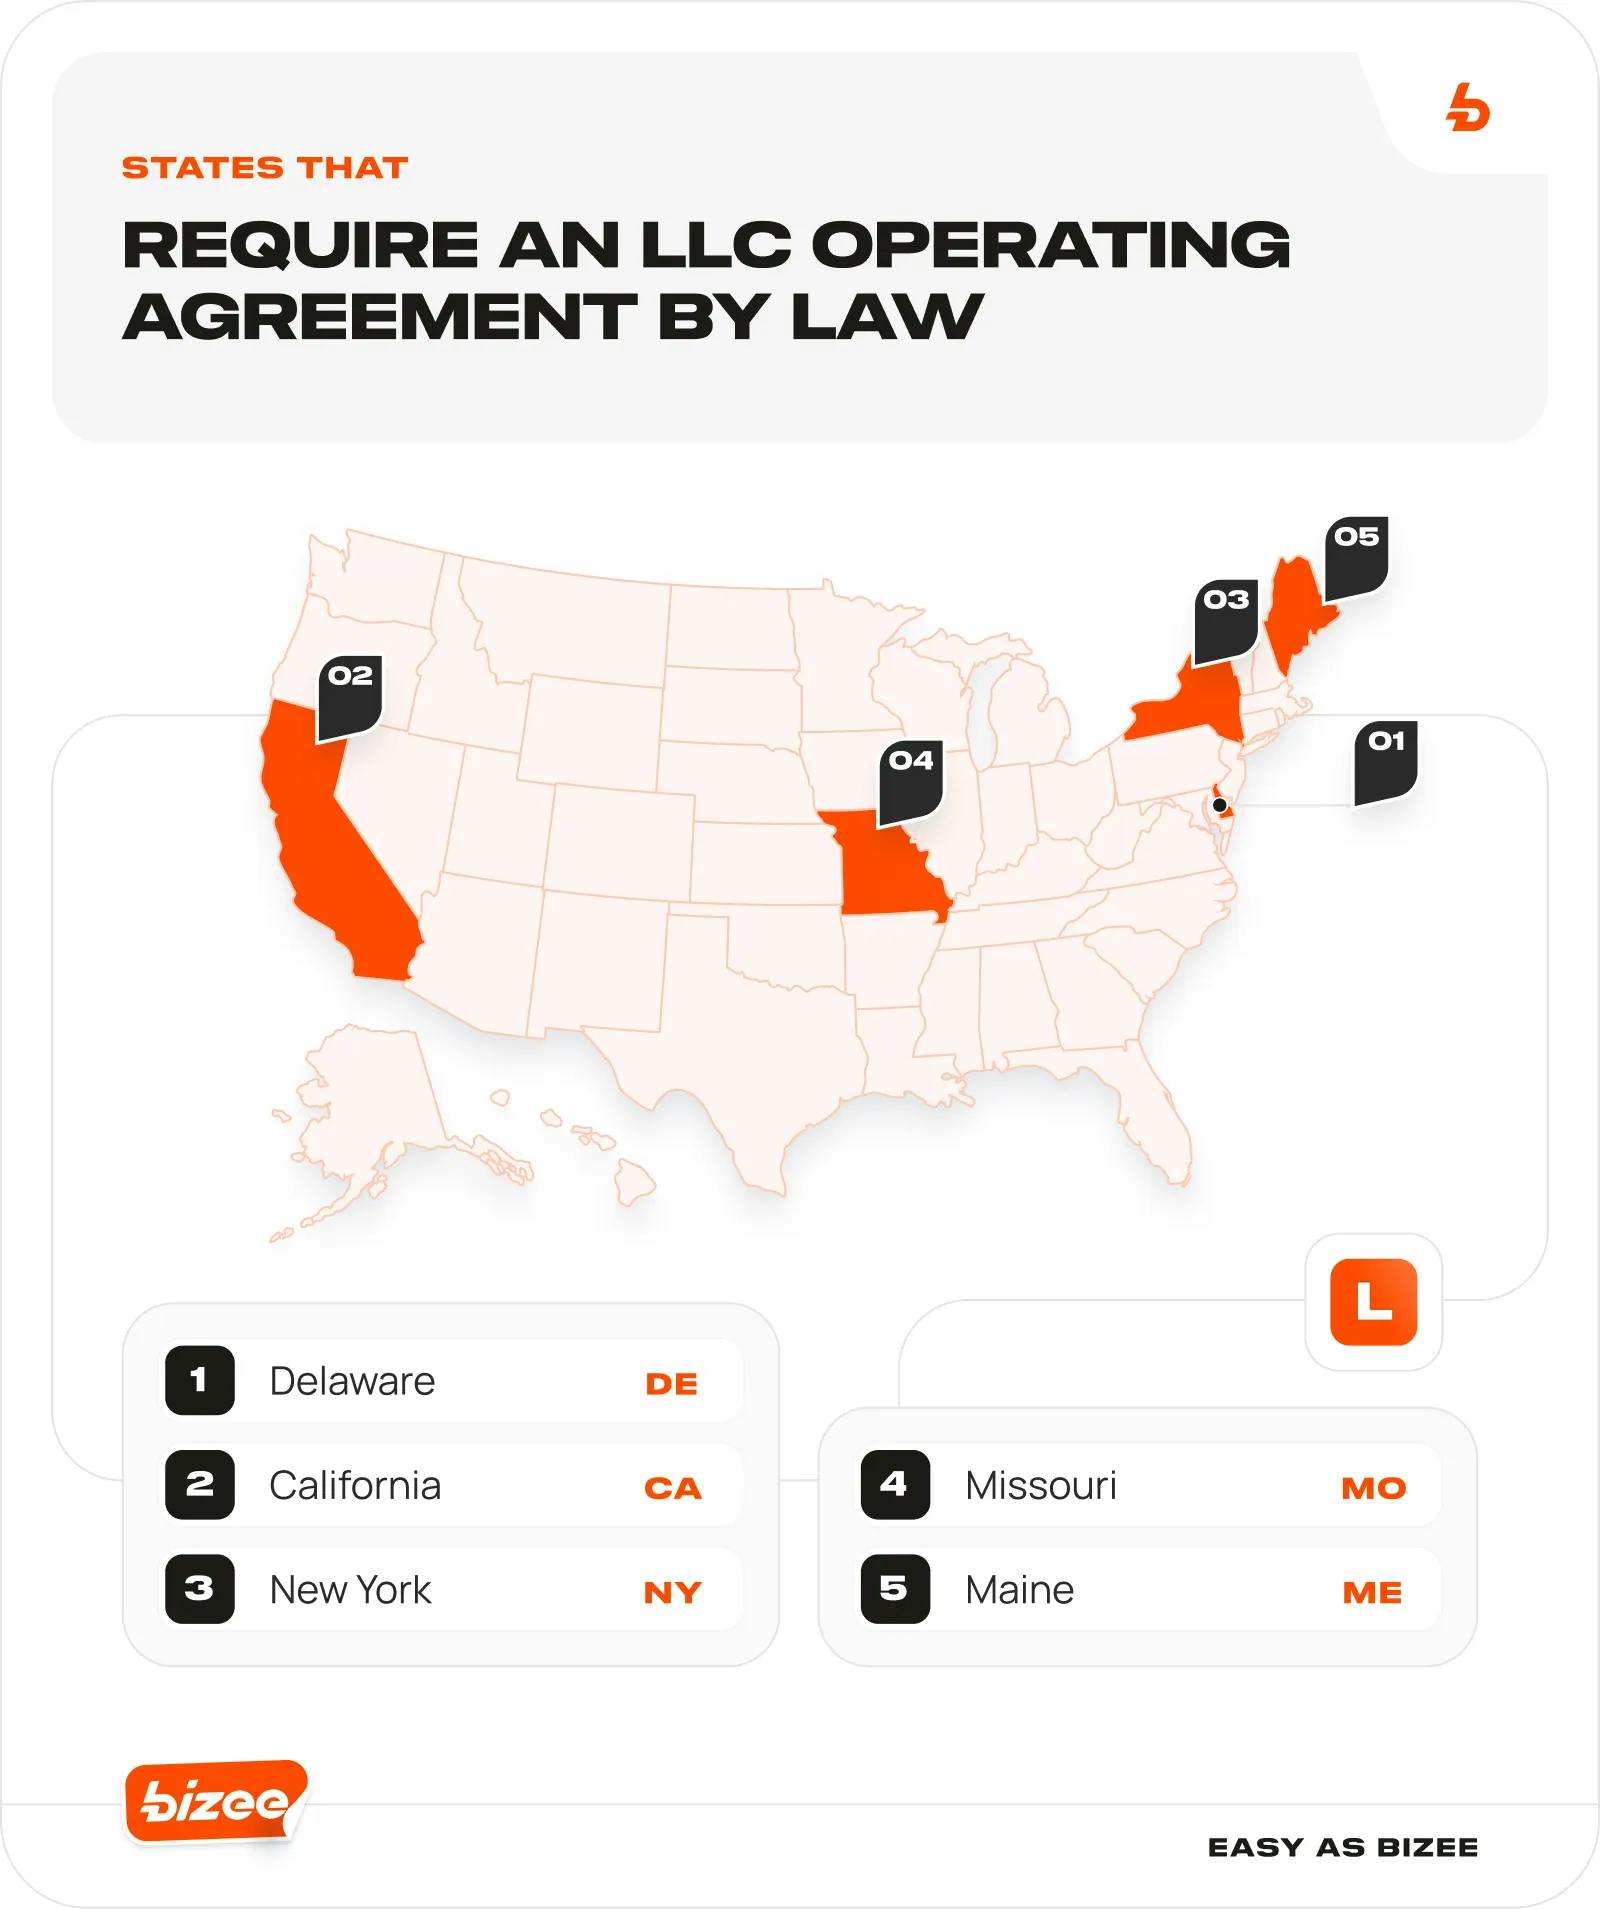 States That Require an LLC Operating Agreement by Law